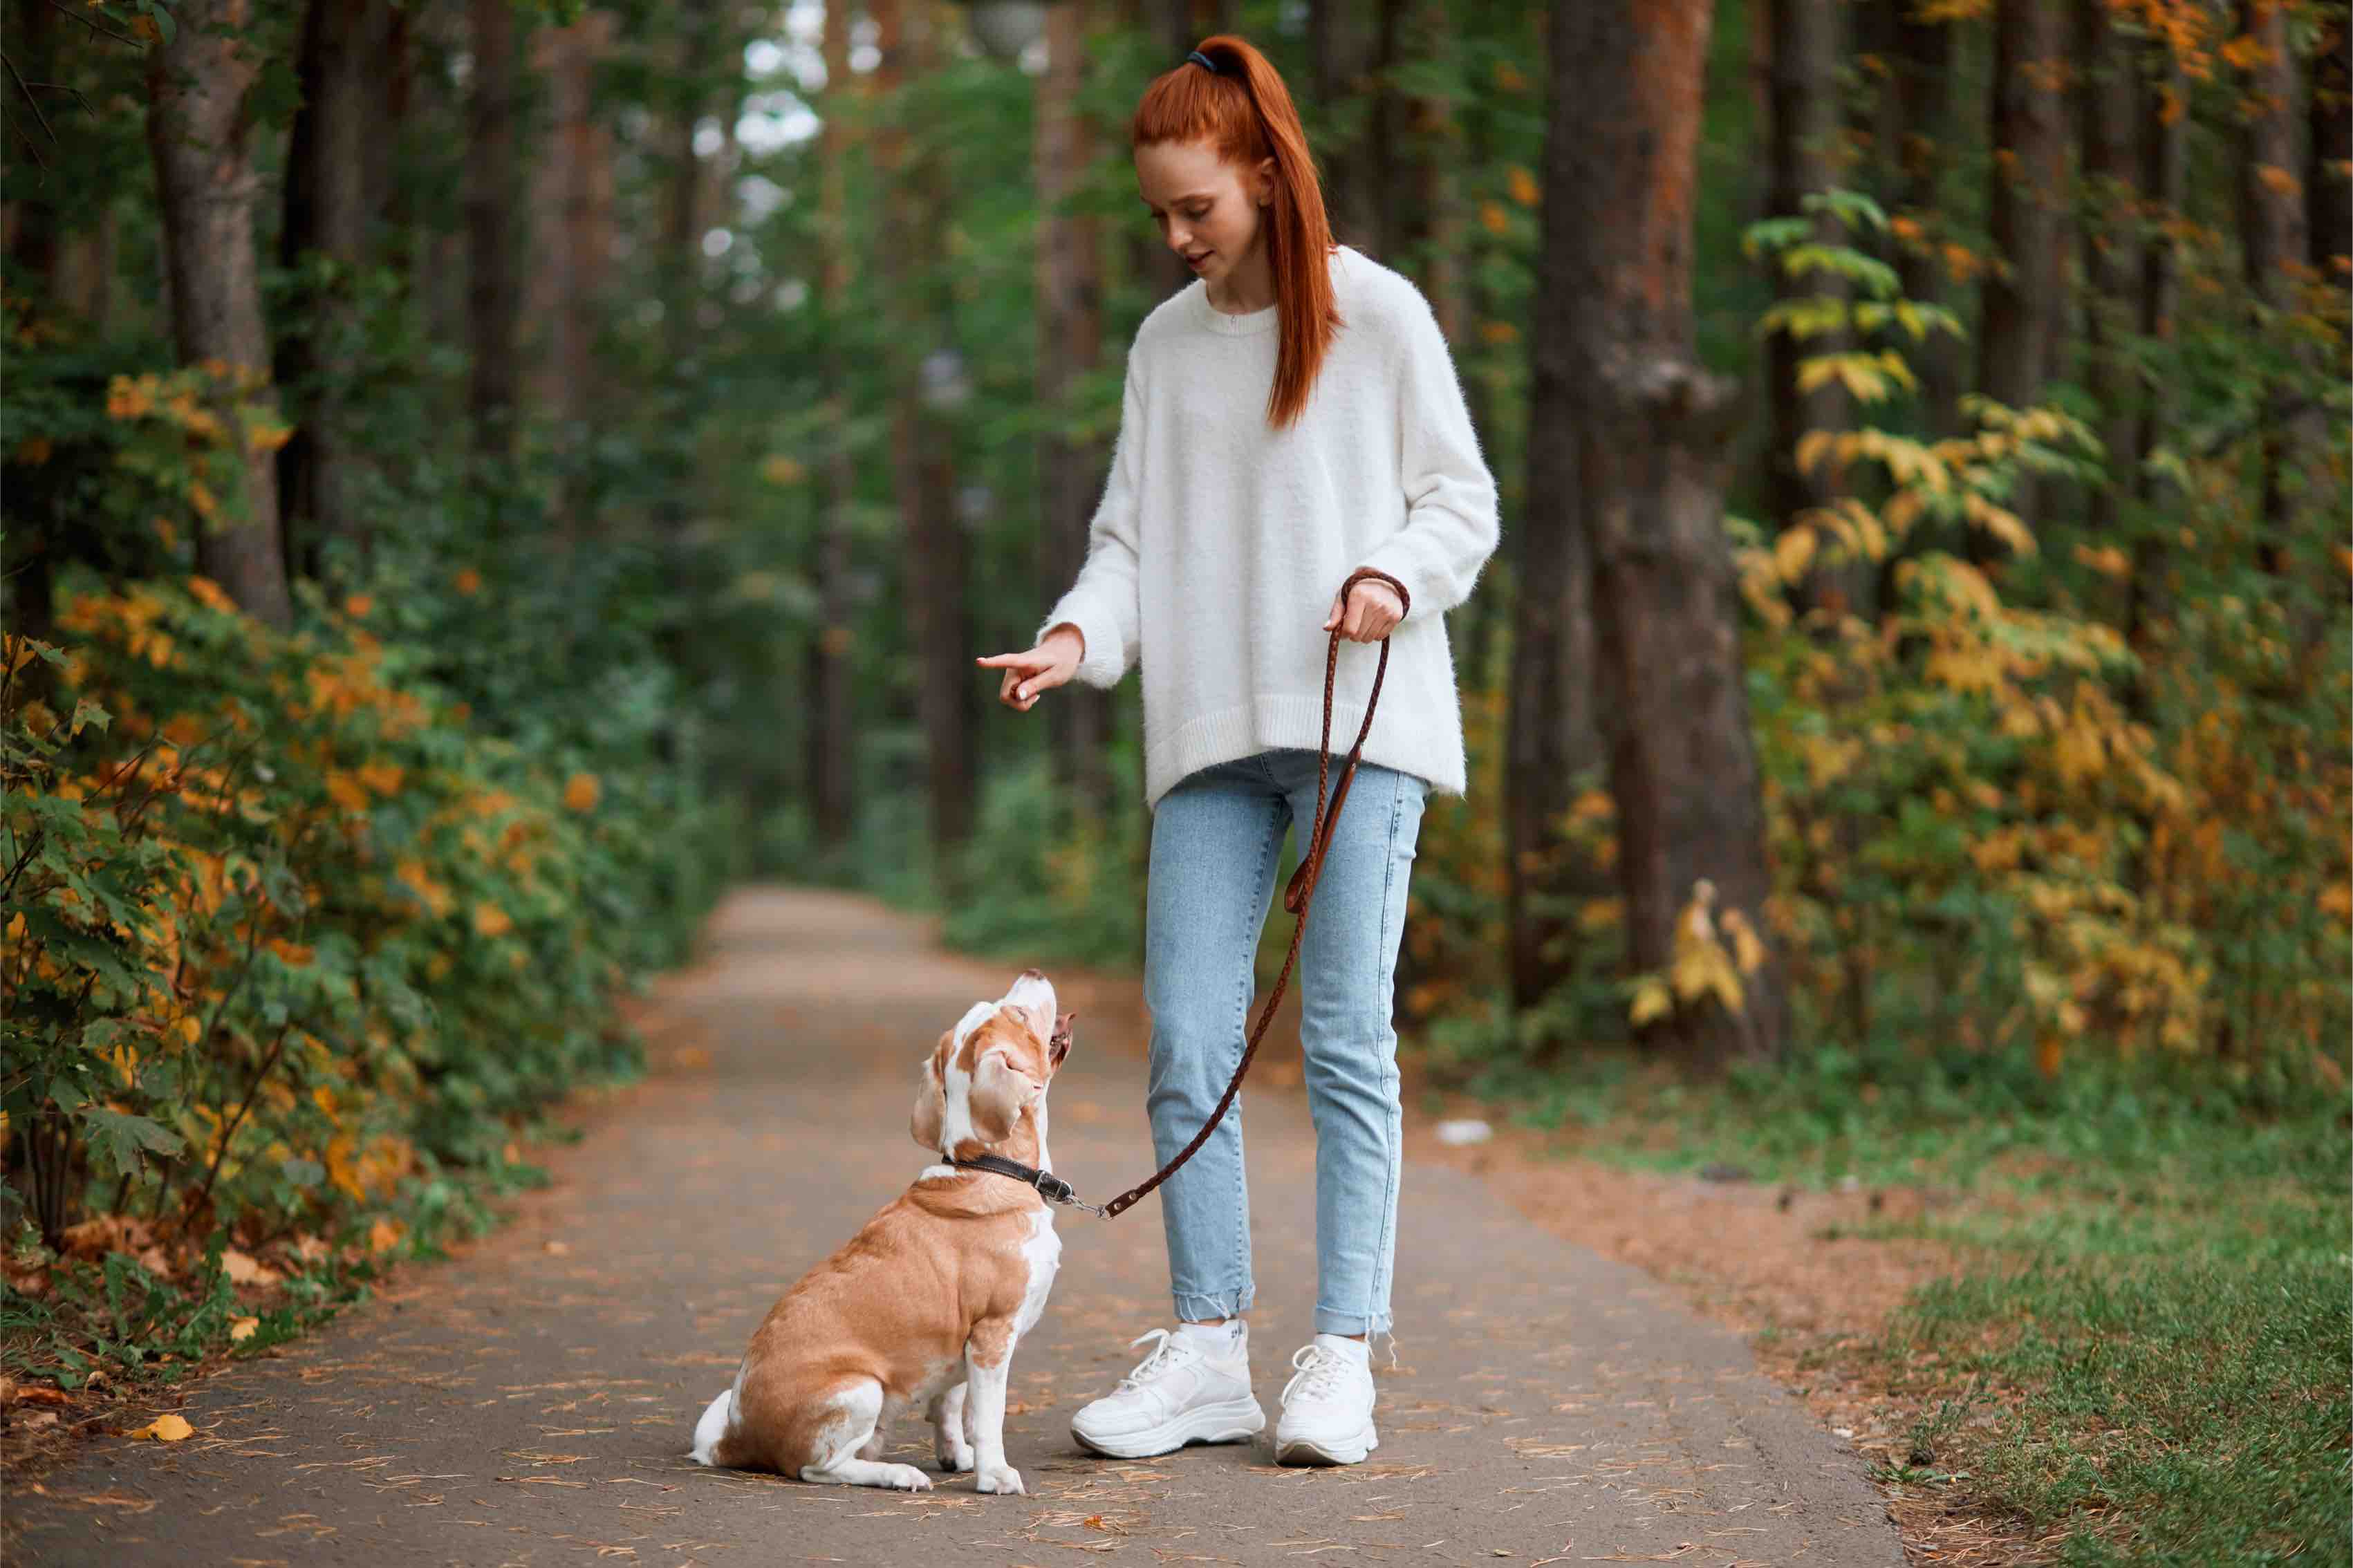 Girl and dog working on their Dog Training Elite of the NC Triangle training on a walk in the park.